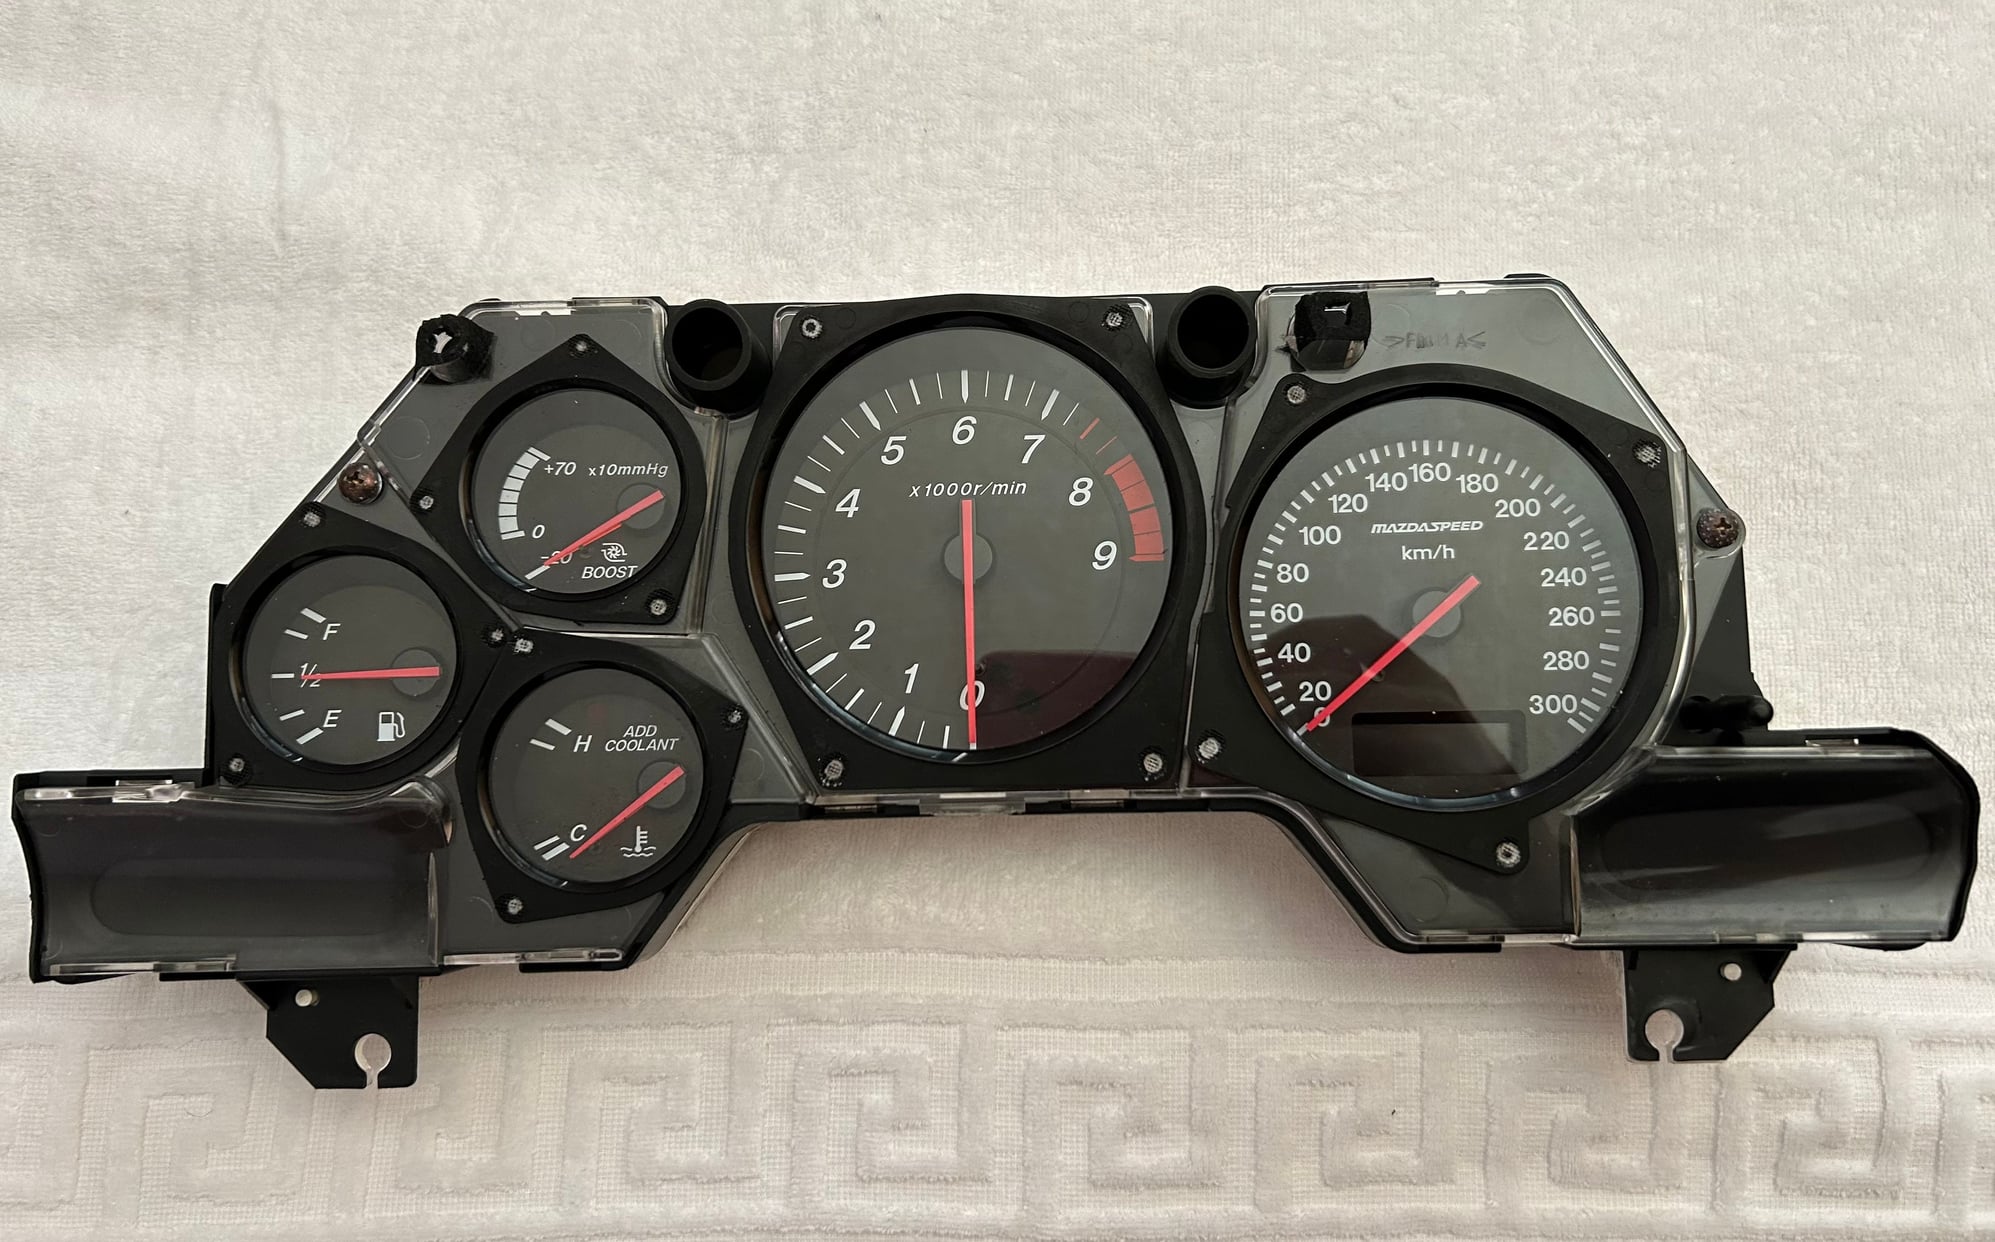 Interior/Upholstery - OEM 1999 Instrument Cluster w/ Mazdaspeed Speedometer - Used - 1992 to 2002 Mazda RX-7 - London HA27DY, United Kingdom